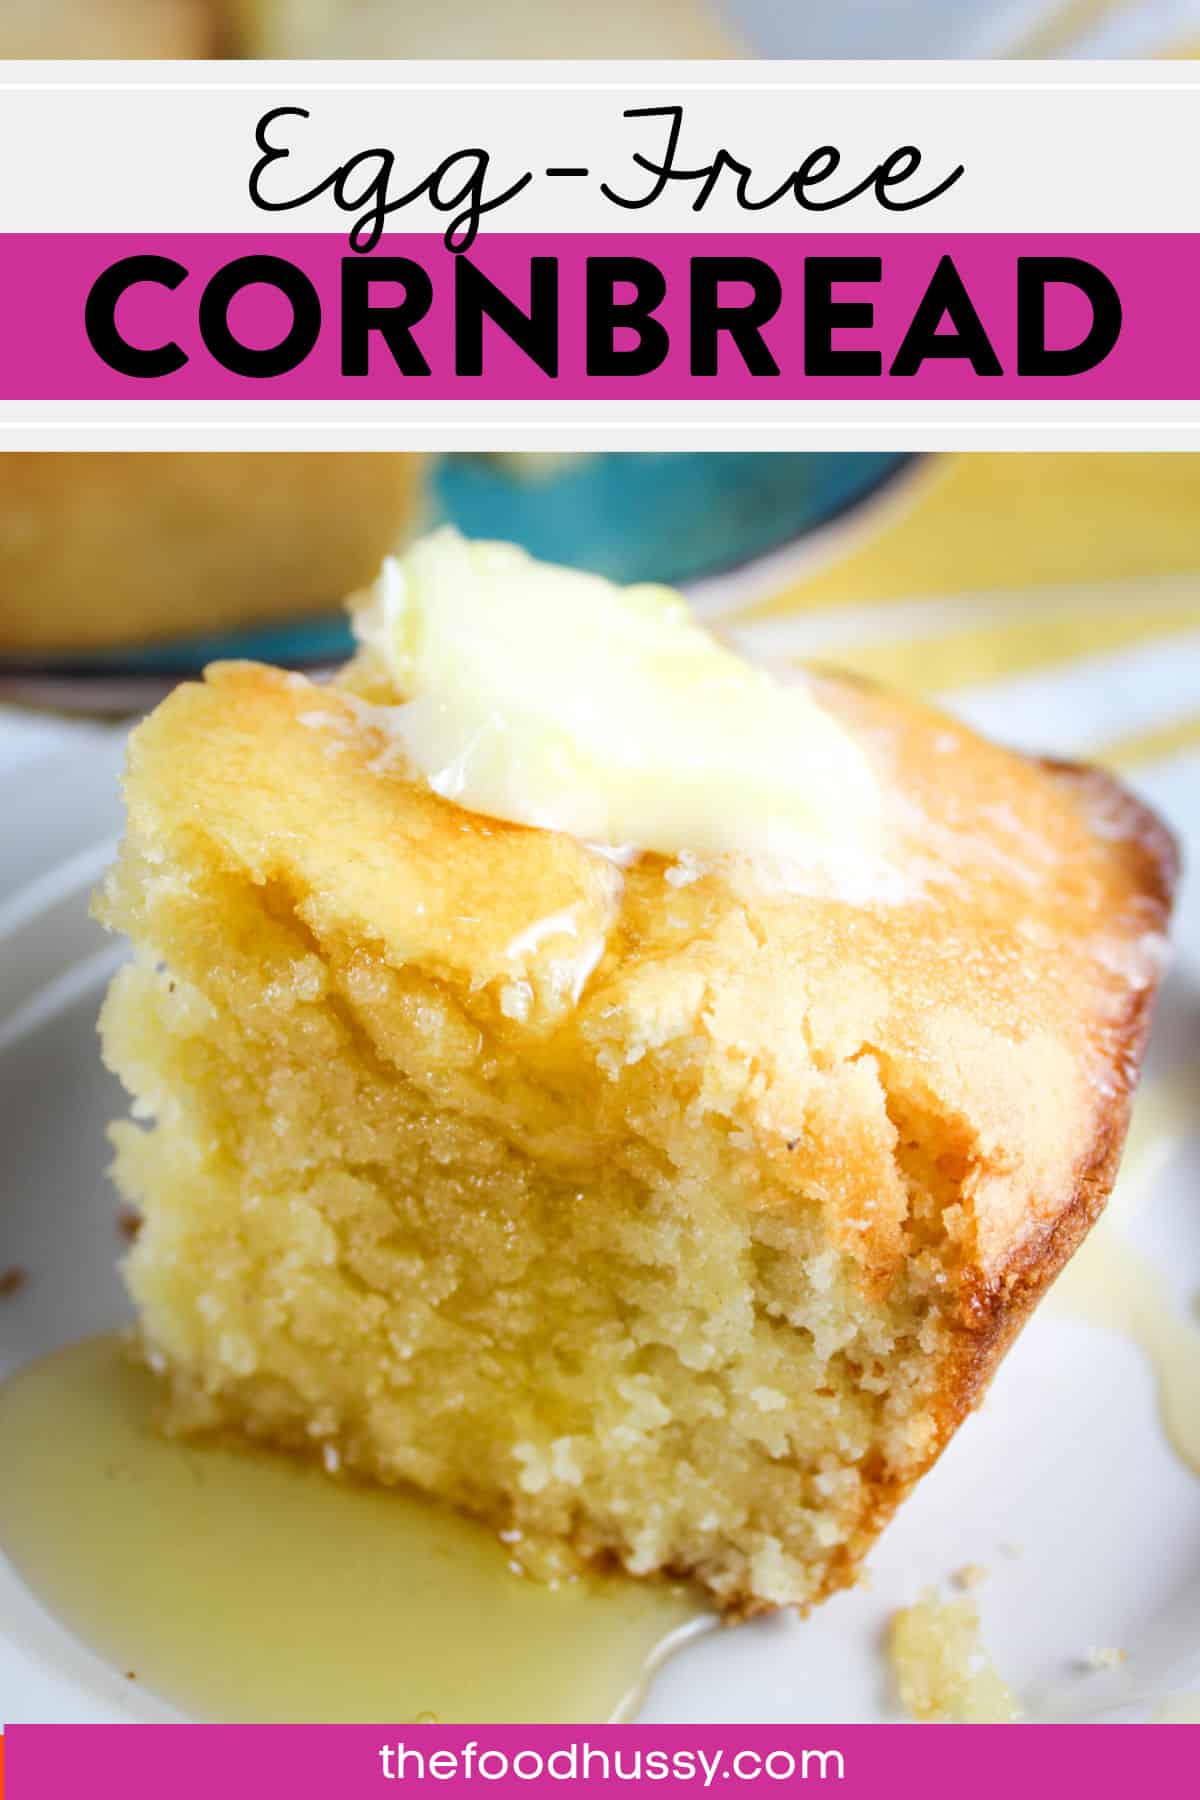 Making Cornbread without Eggs is simple! There are also options for what to use as an egg substitute. In the end, you'll make a pan of thick, moist cornbread that will delight the whole family! via @foodhussy